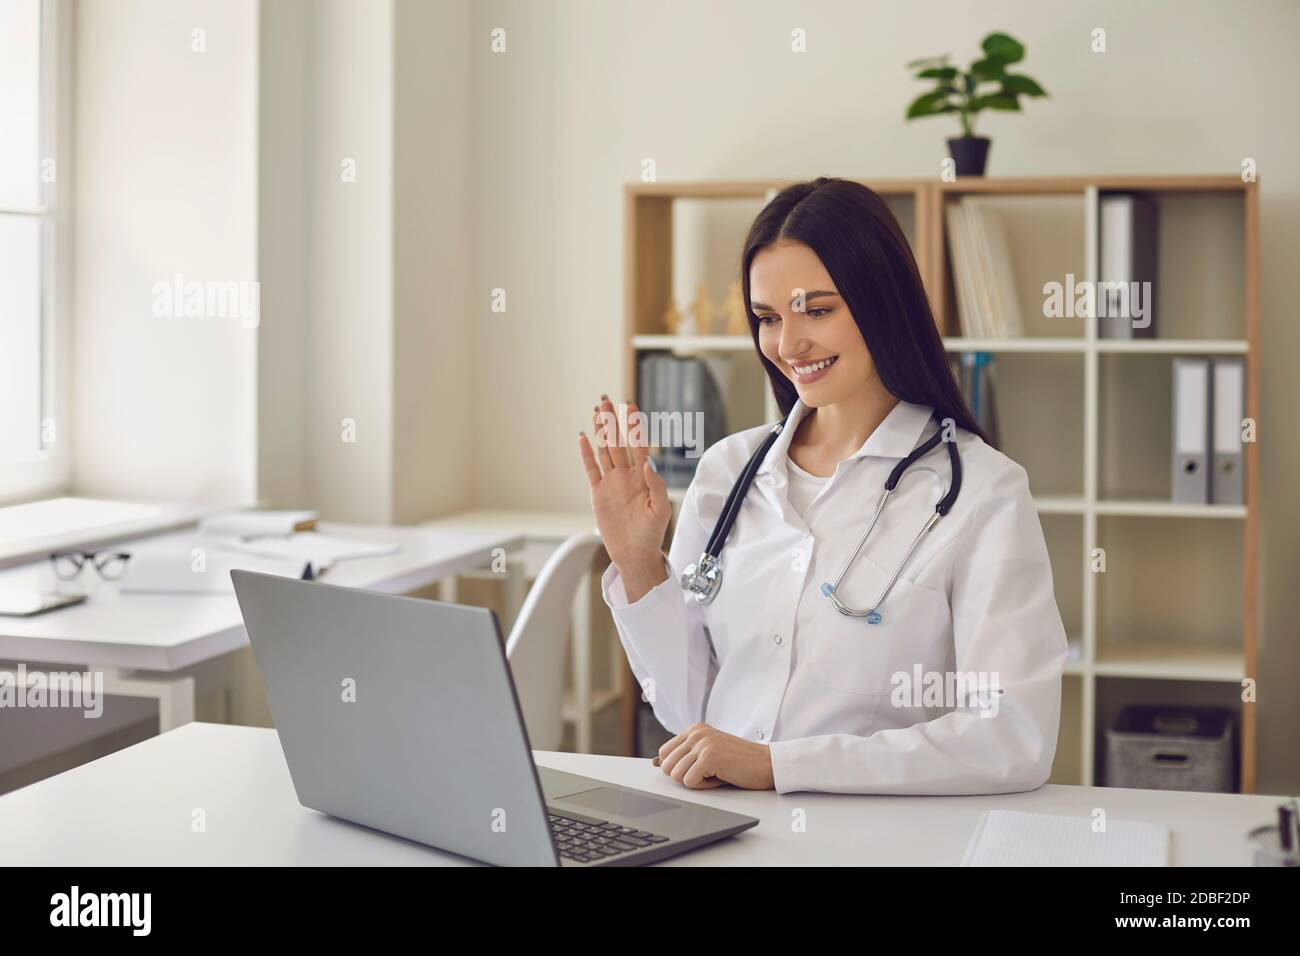 Friendly doctor in hospital office making video call and waving hand at laptop screen Stock Photo